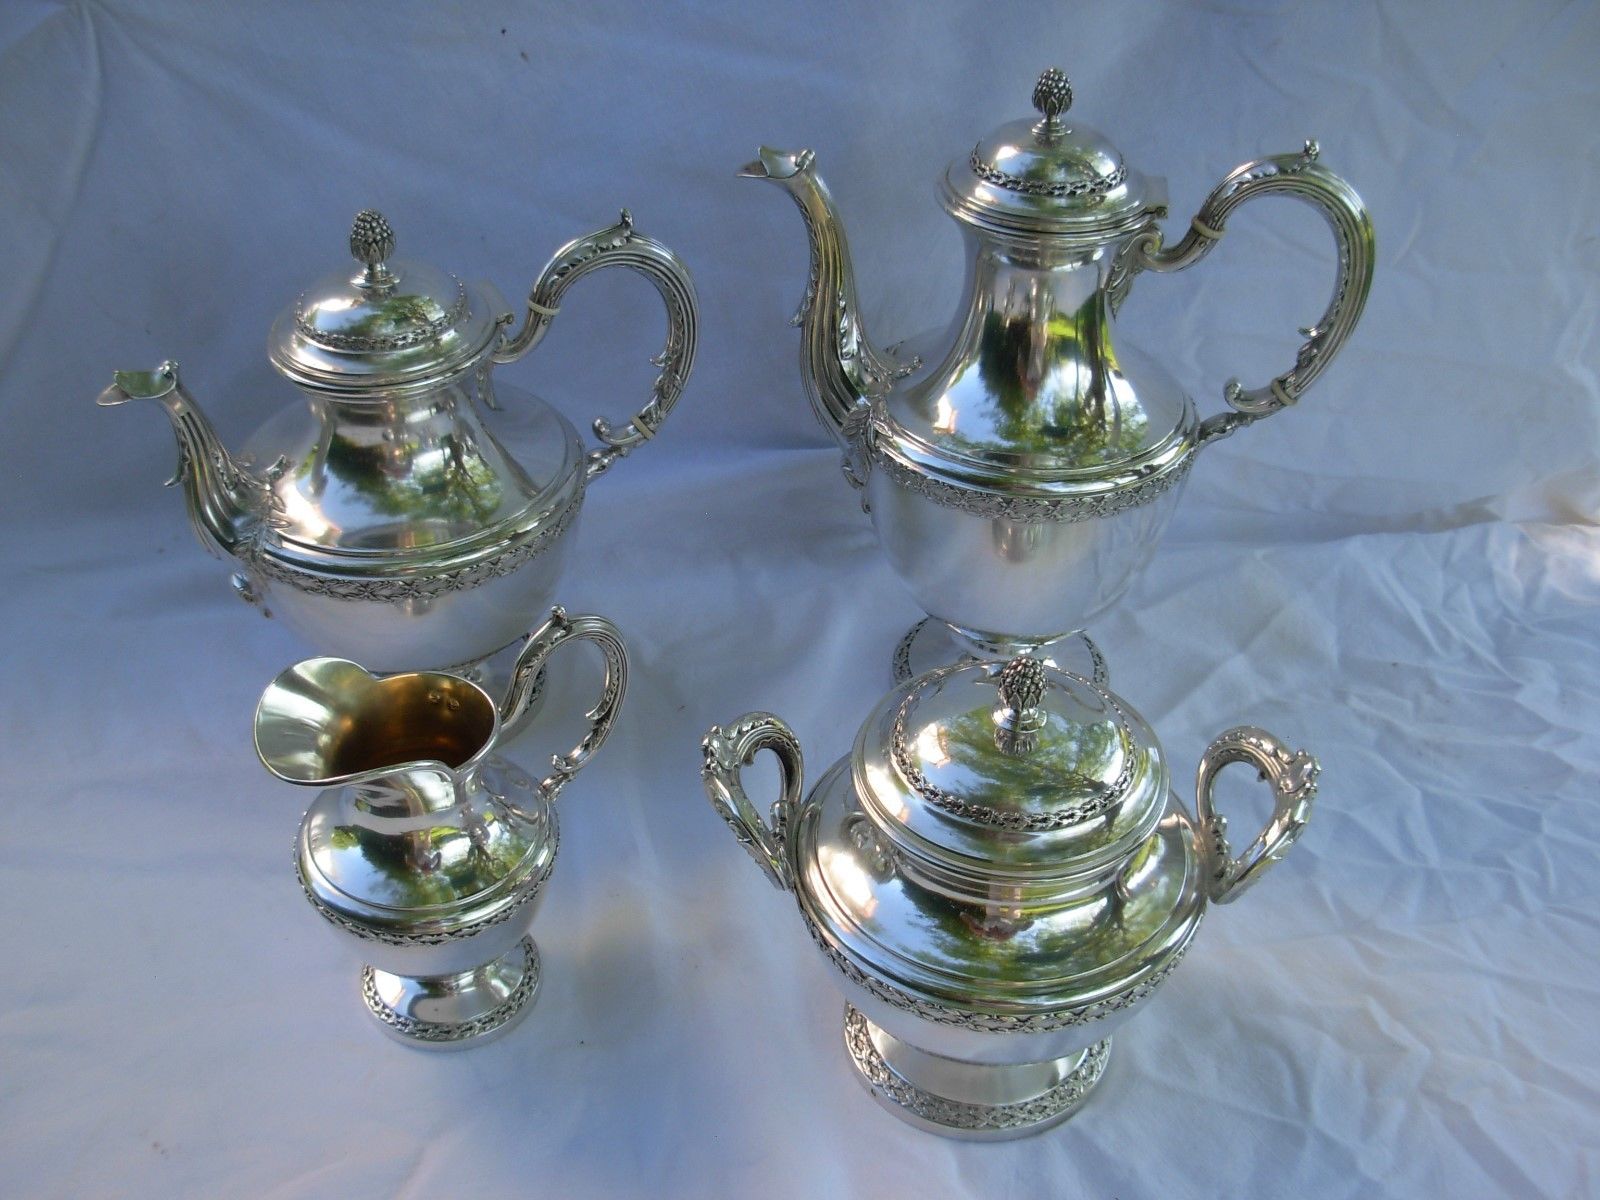 BOULENGER,ANTIQUE FRENCH STERLING SILVER TEA,COFFEE SET,4 PIECES,EARLY 20th .